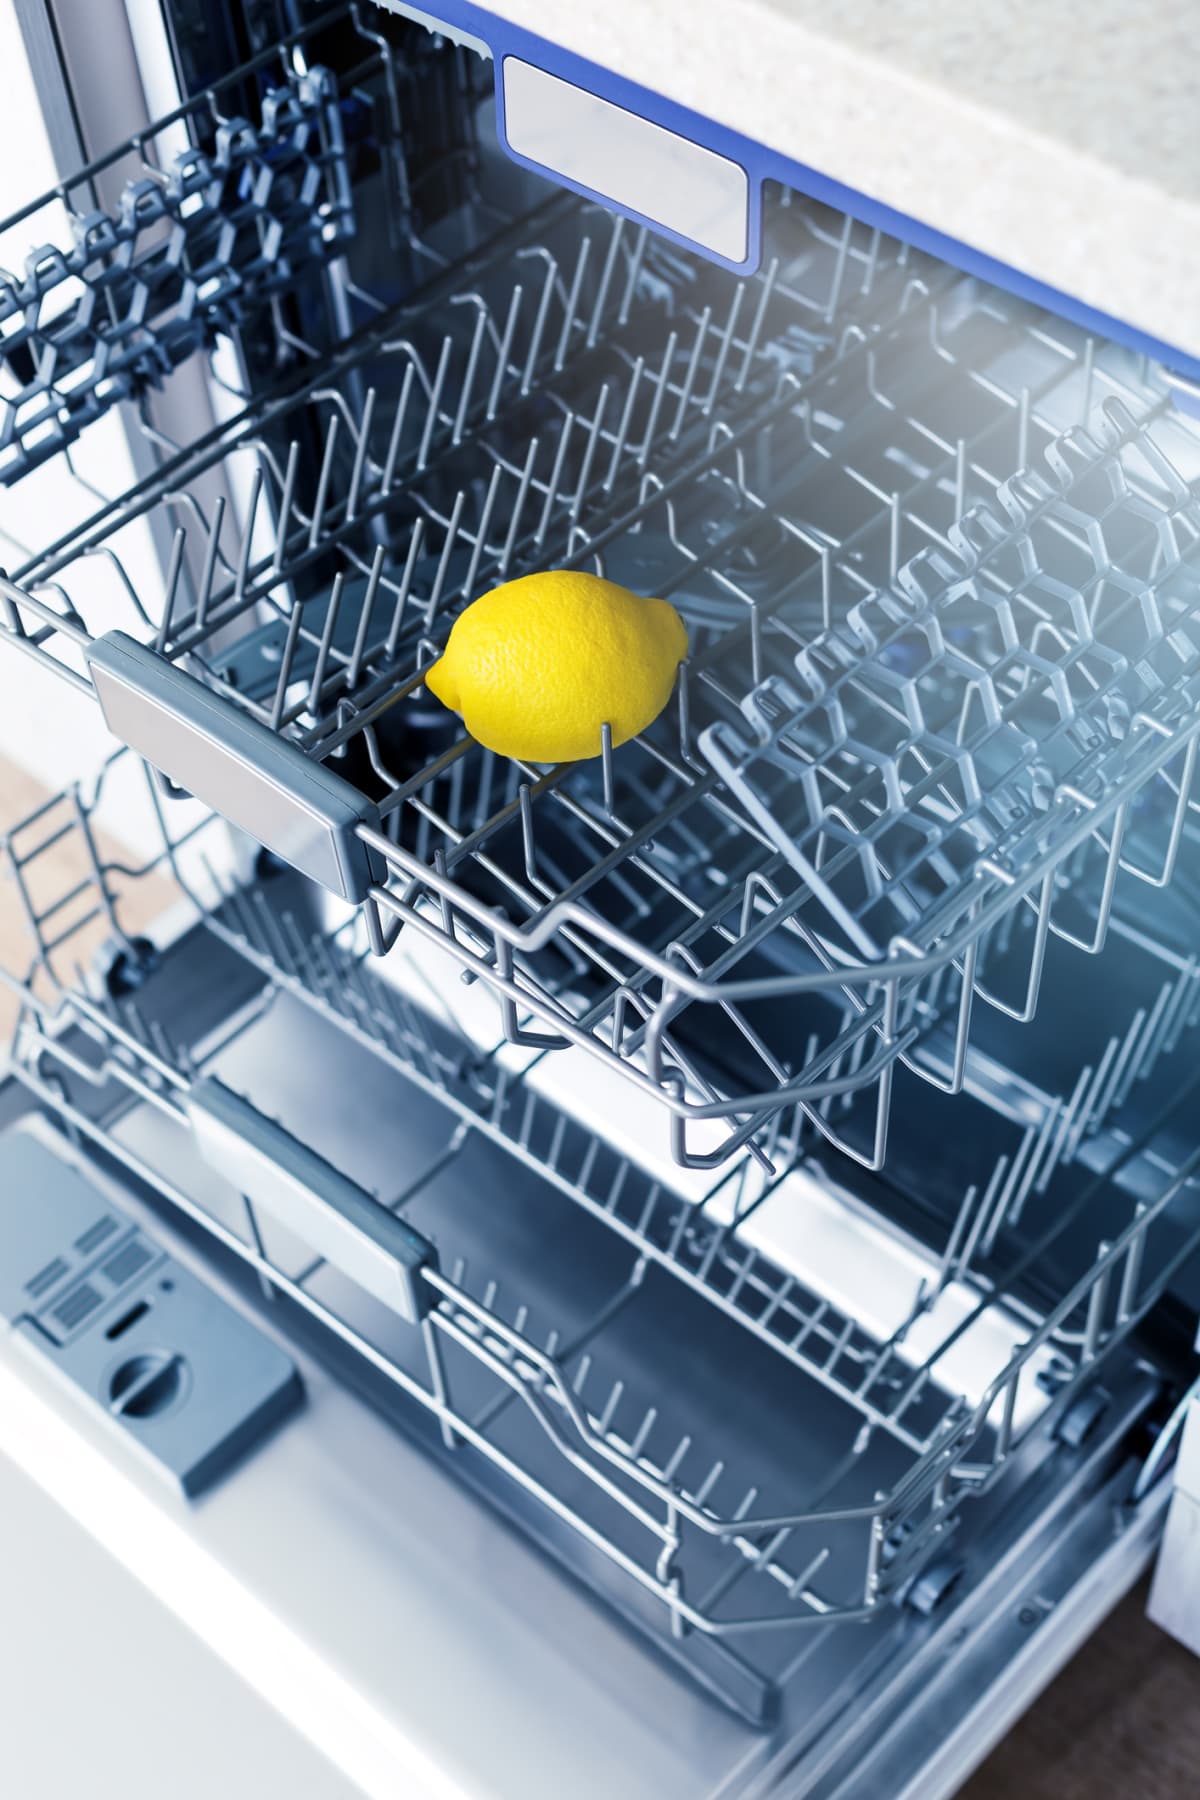 Empty dishwasher with fresh yellow lemon on shelf, aroma freshness care concept, clean equipment,  home appliance dishwashing machine in kitchen interior, no people